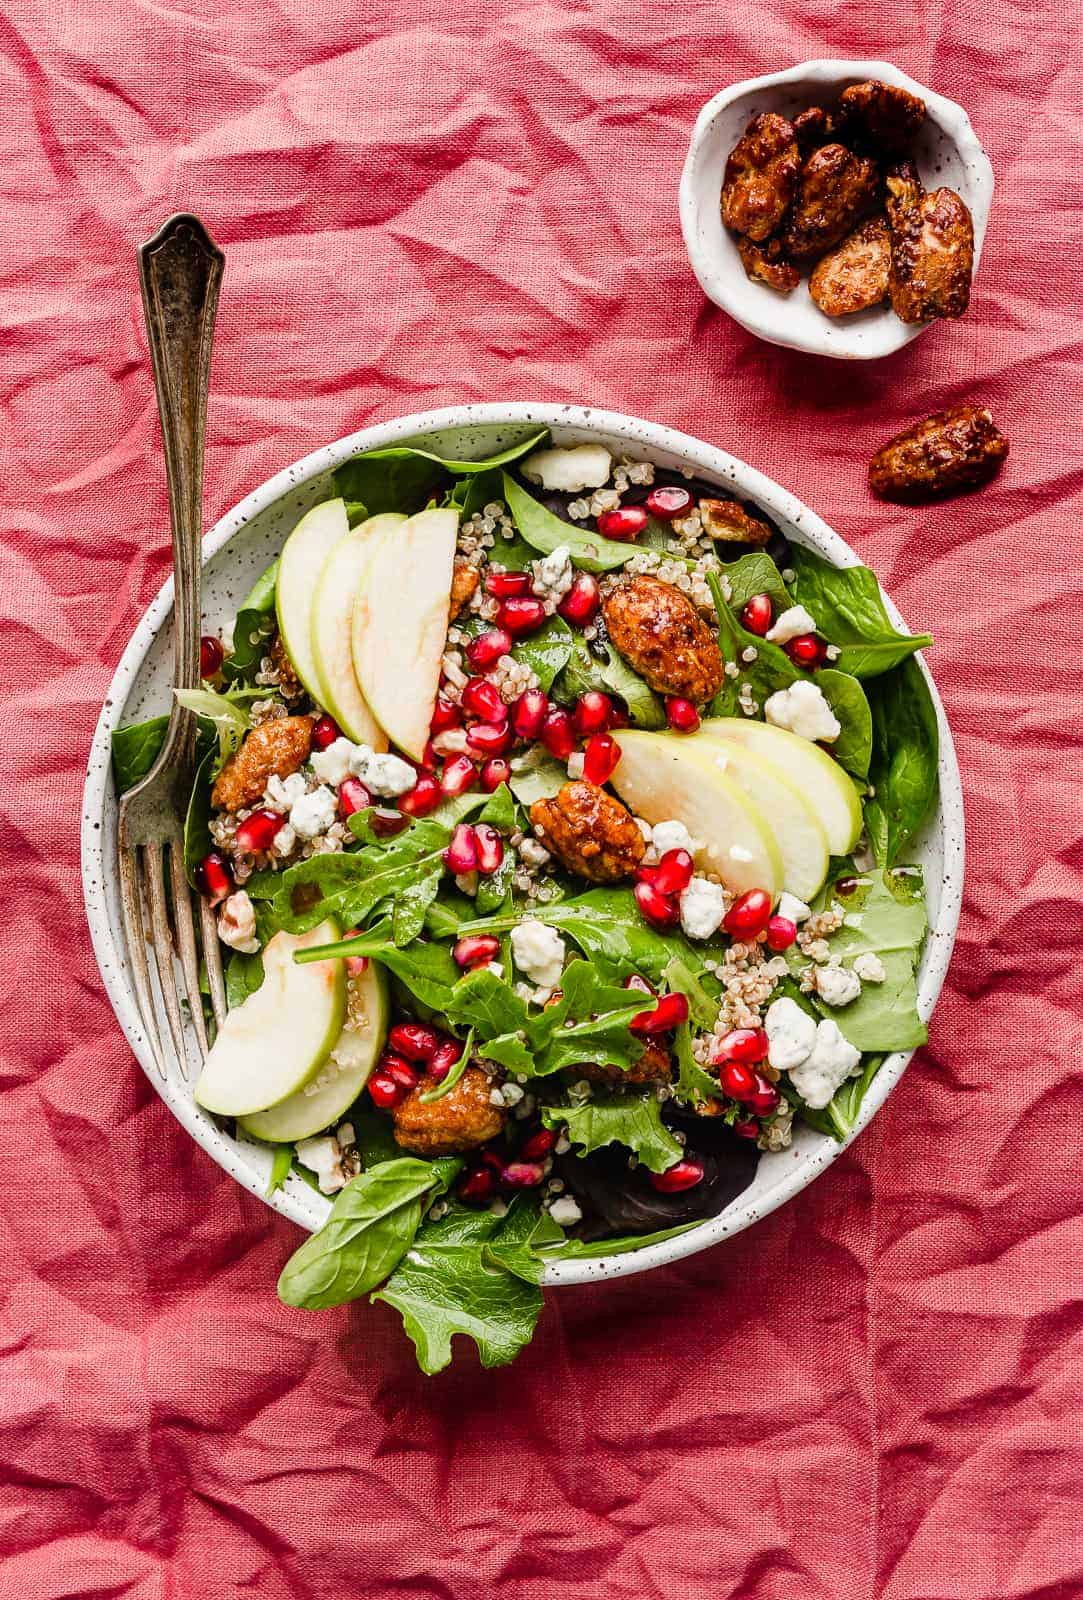 A plate of Pomegranate Salad on a red linen tablecloth.